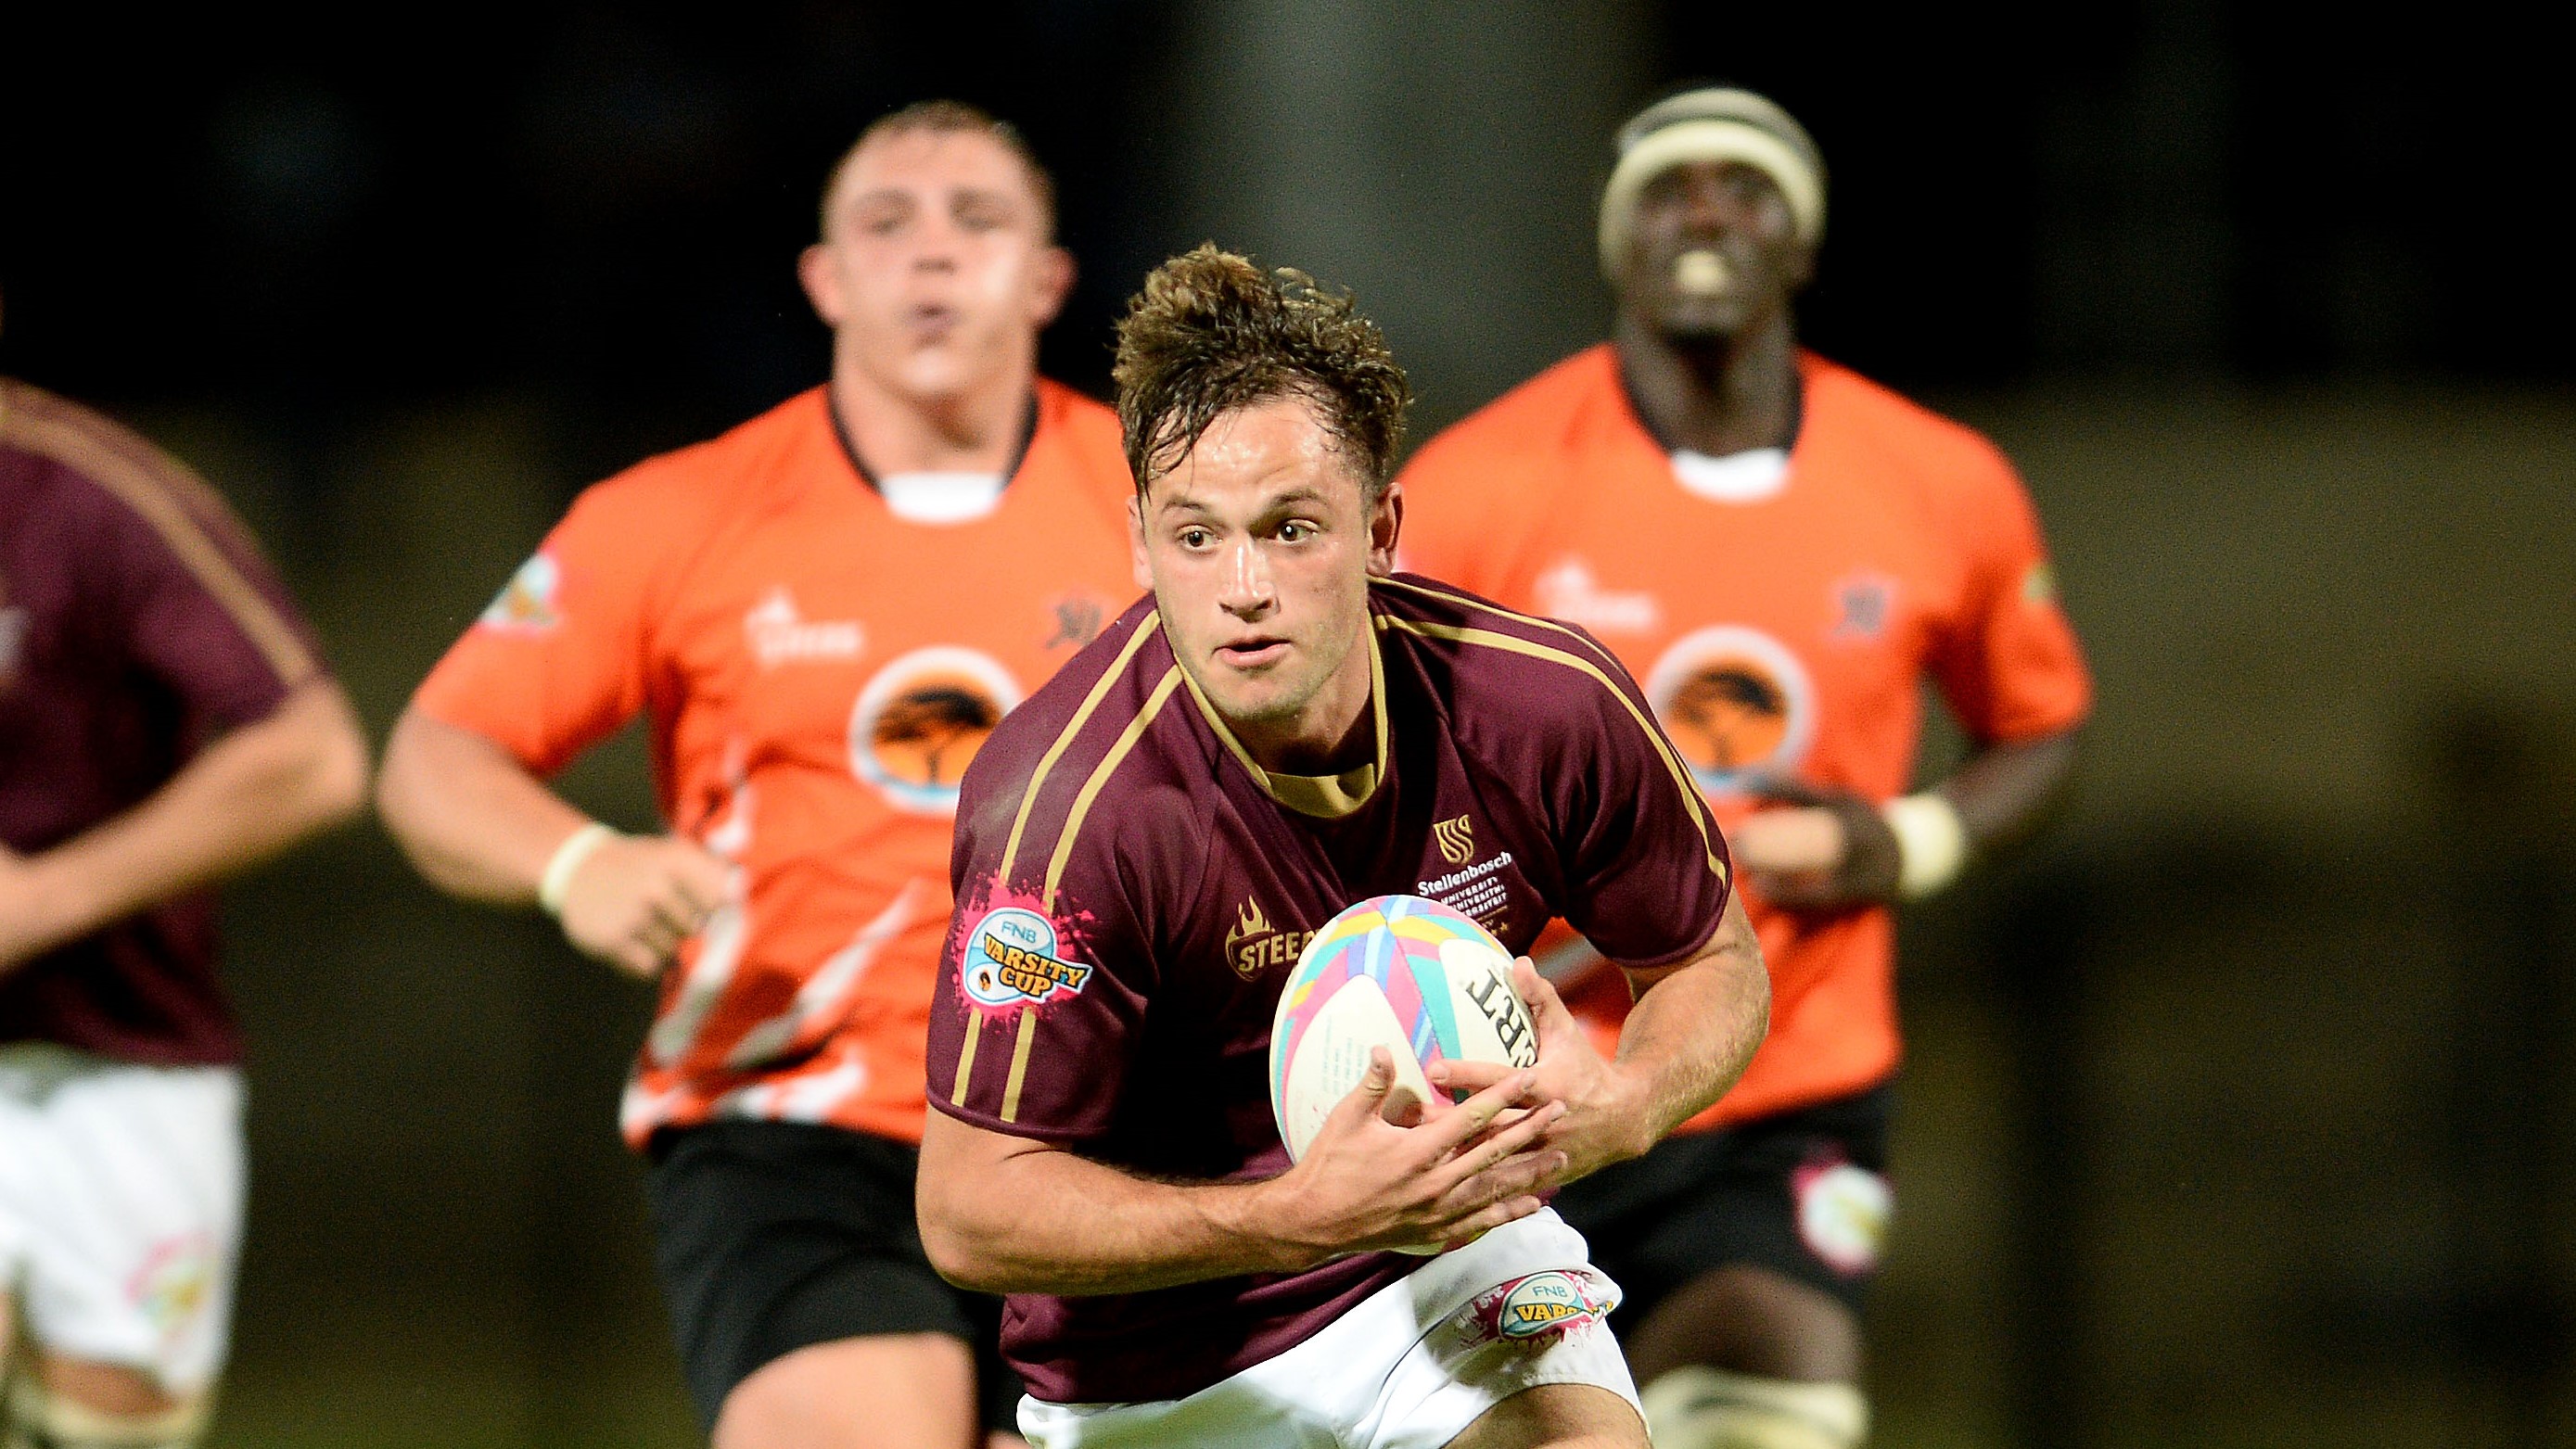 Brendan Venter of Maties during the 2022 Varsity Cup fourth round match between the FNB Maties and FNB UJ at the Danie Craven Stadium, Stellenbosch, SOUTH AFRICA